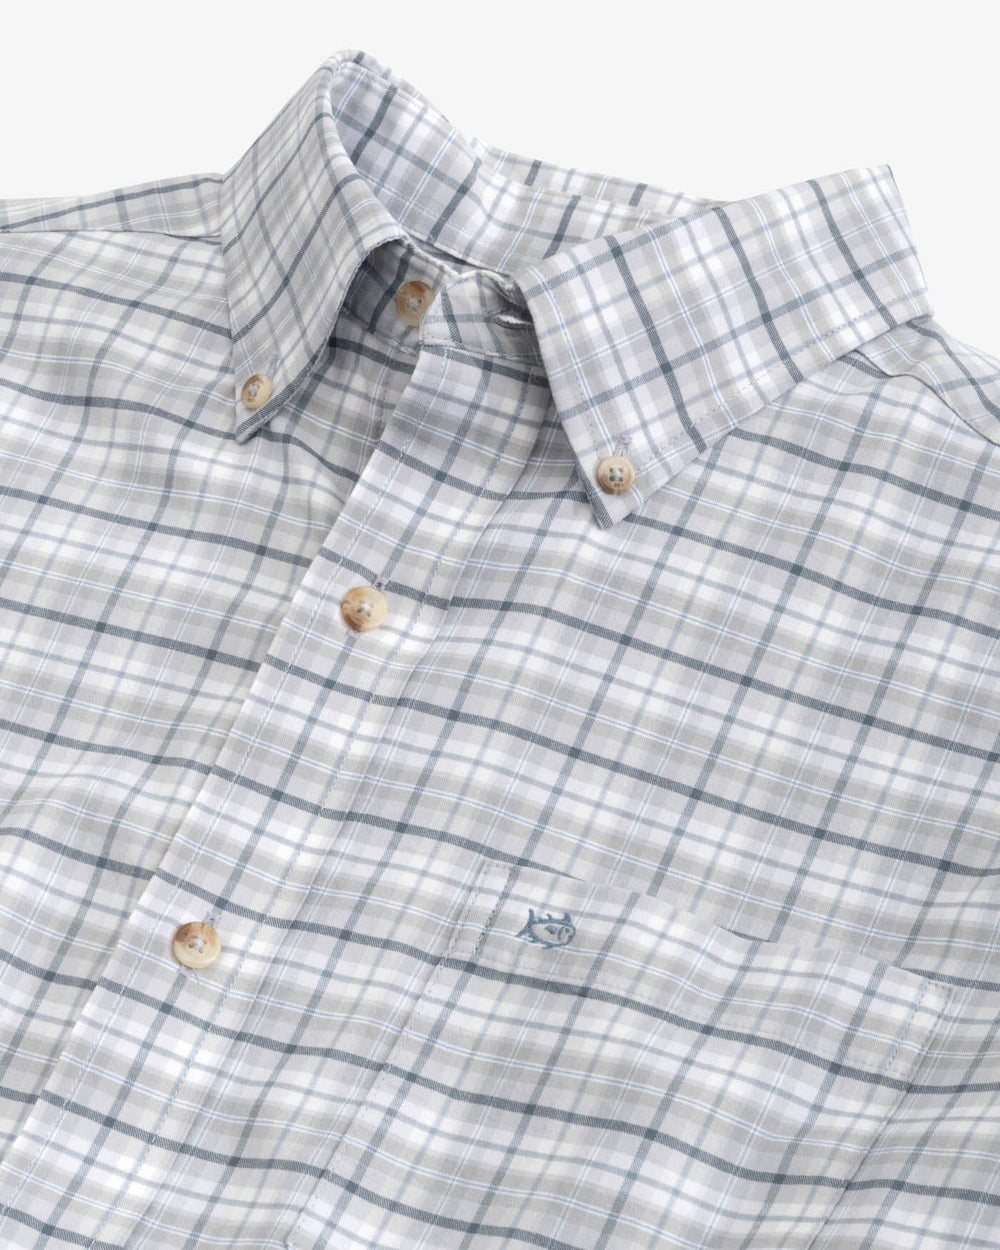 The detail view of the Southern Tide Coastal Passage Patton Plaid Sport Shirts by Southern Tide - Platinum Grey